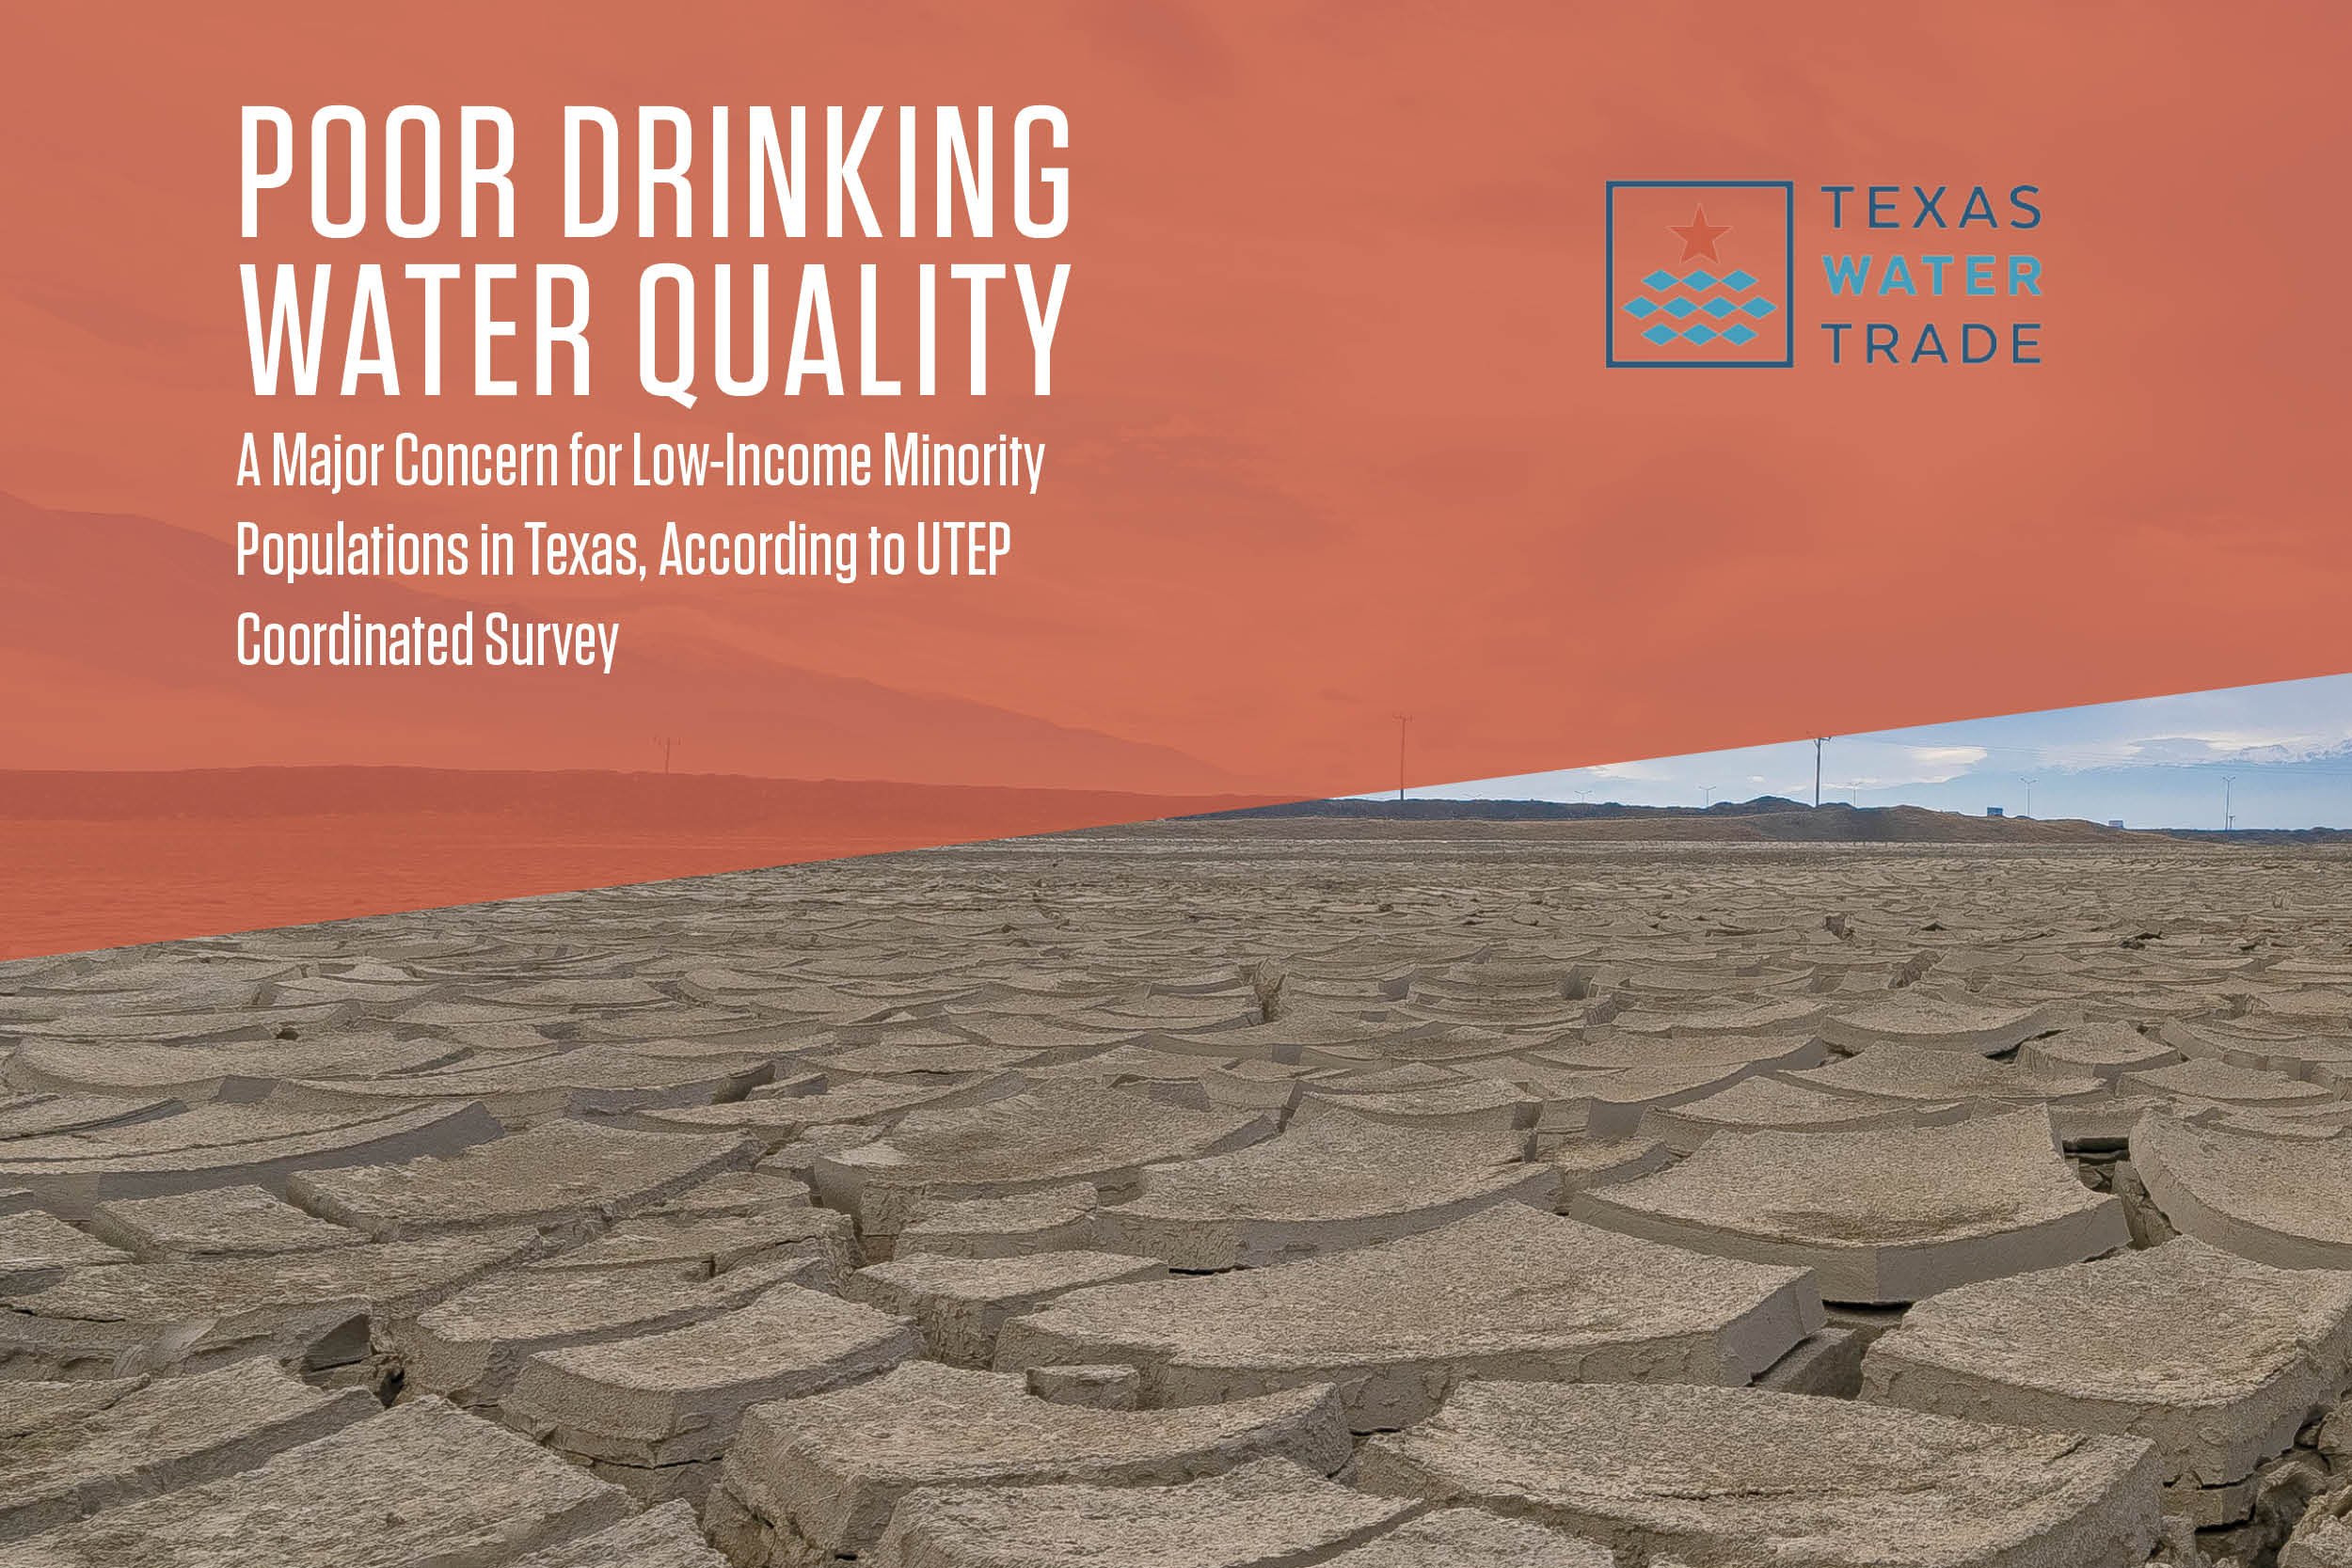 Poor Drinking Water Quality a Major Concern for Low-Income Minority Populations in Texas, According to UTEP Coordinated Survey